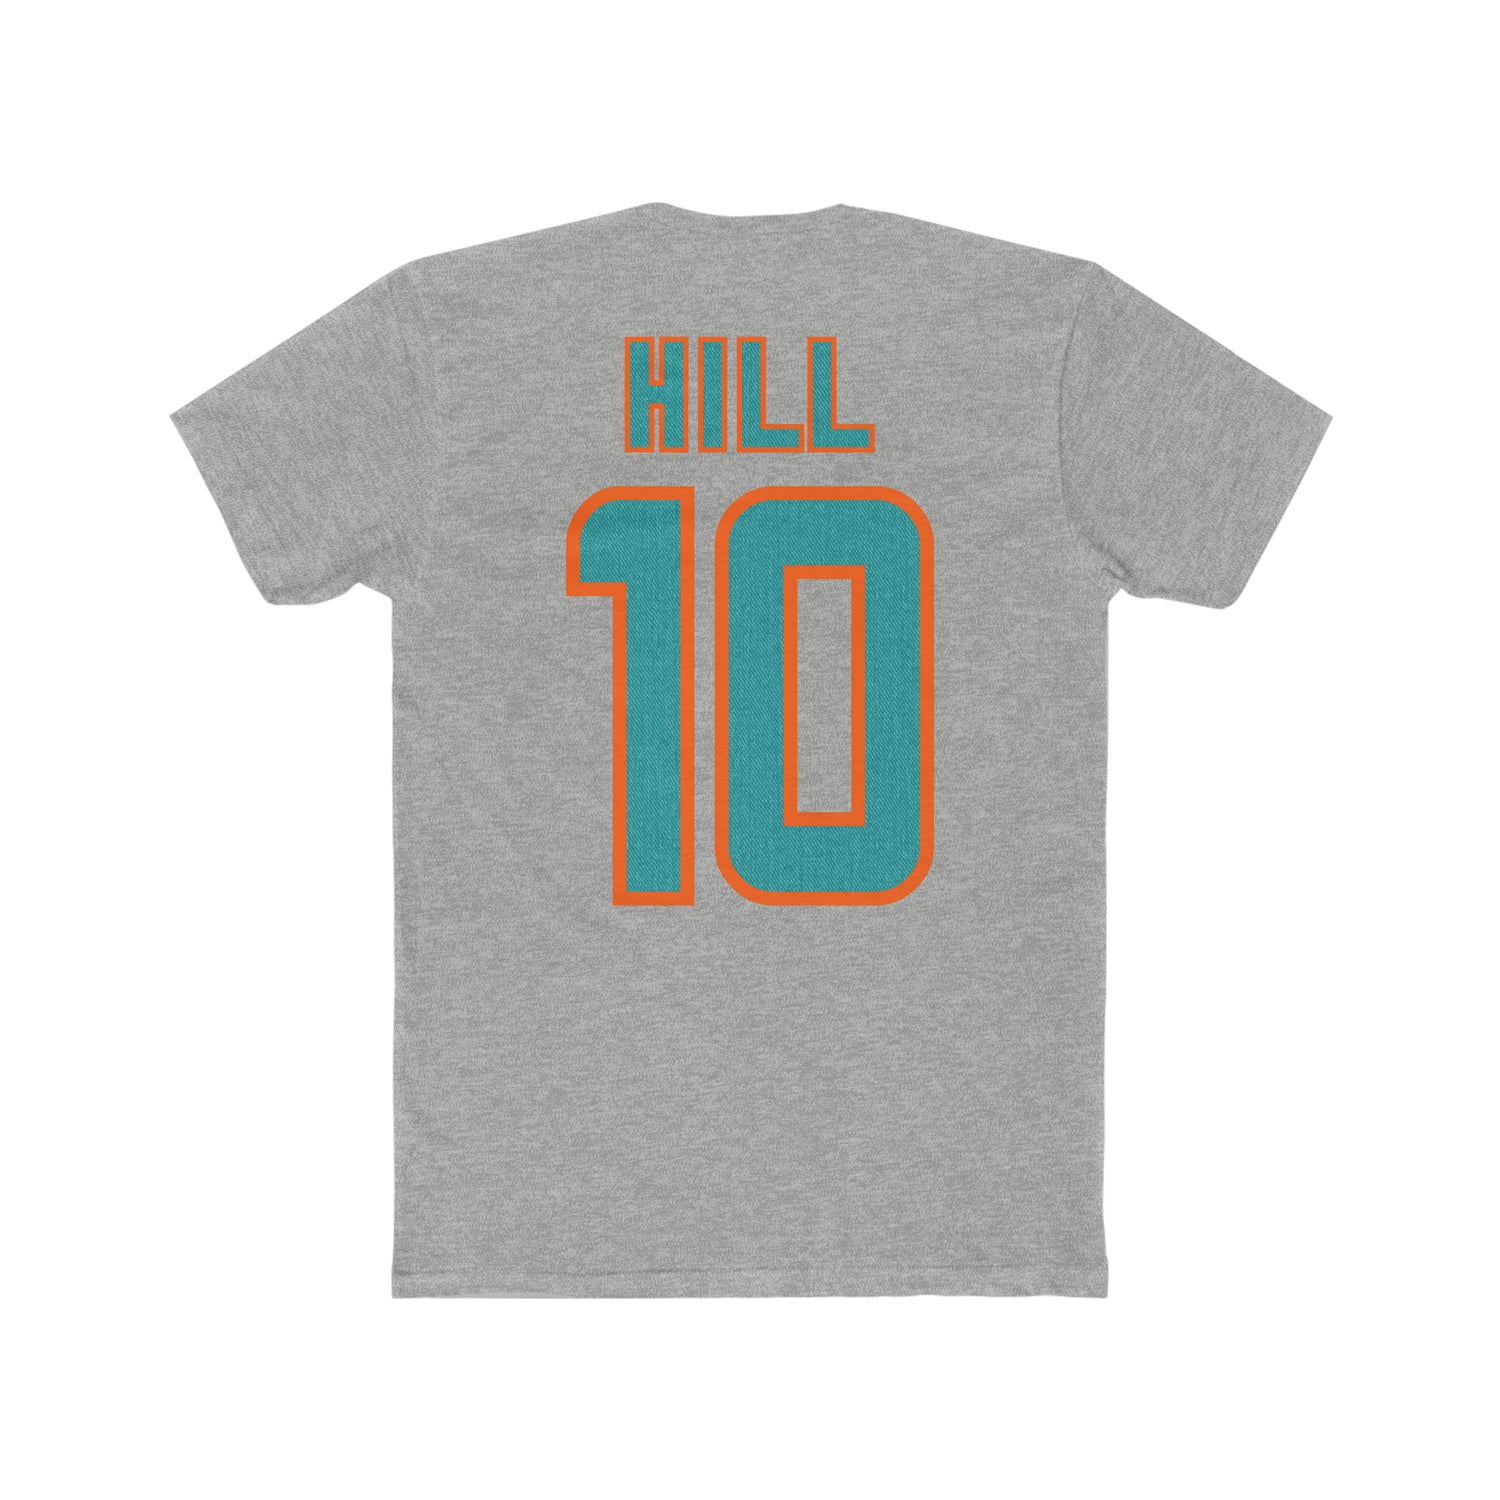 Hill Player Tee